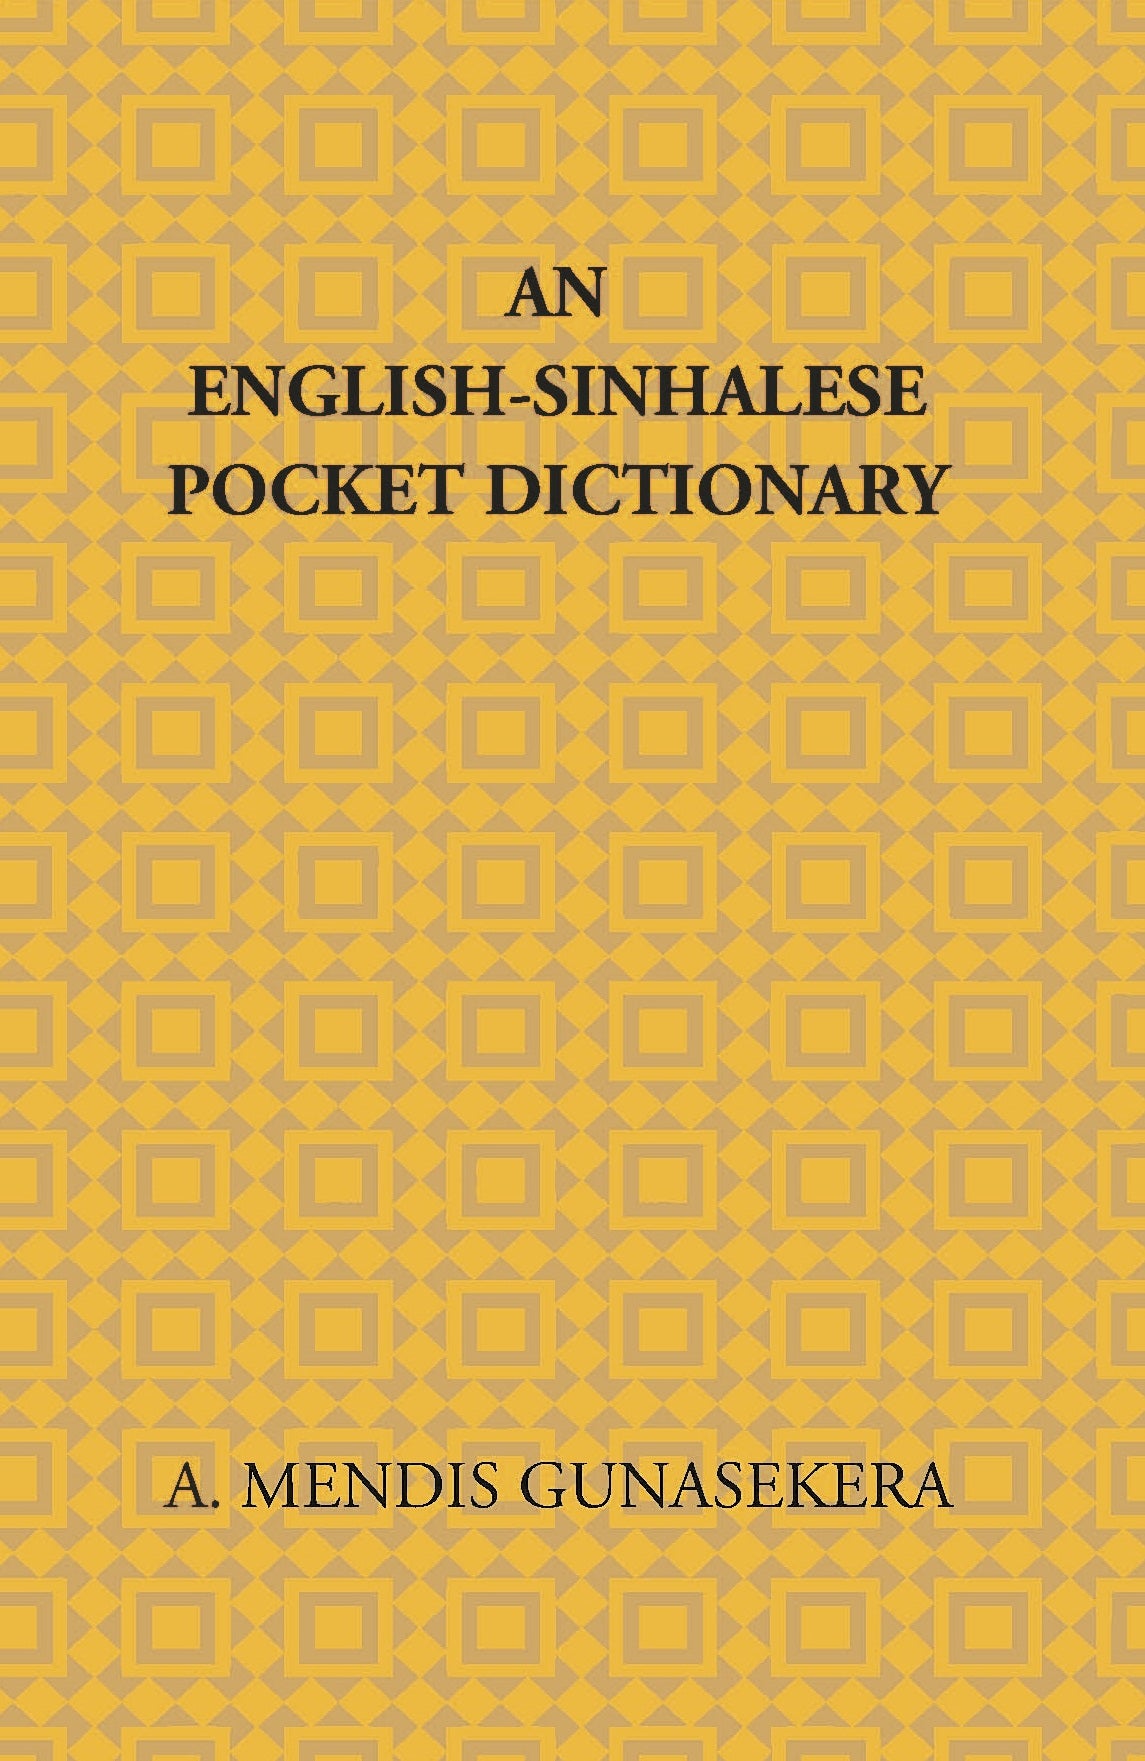 An English-Sinhalese Pocket Dictionary